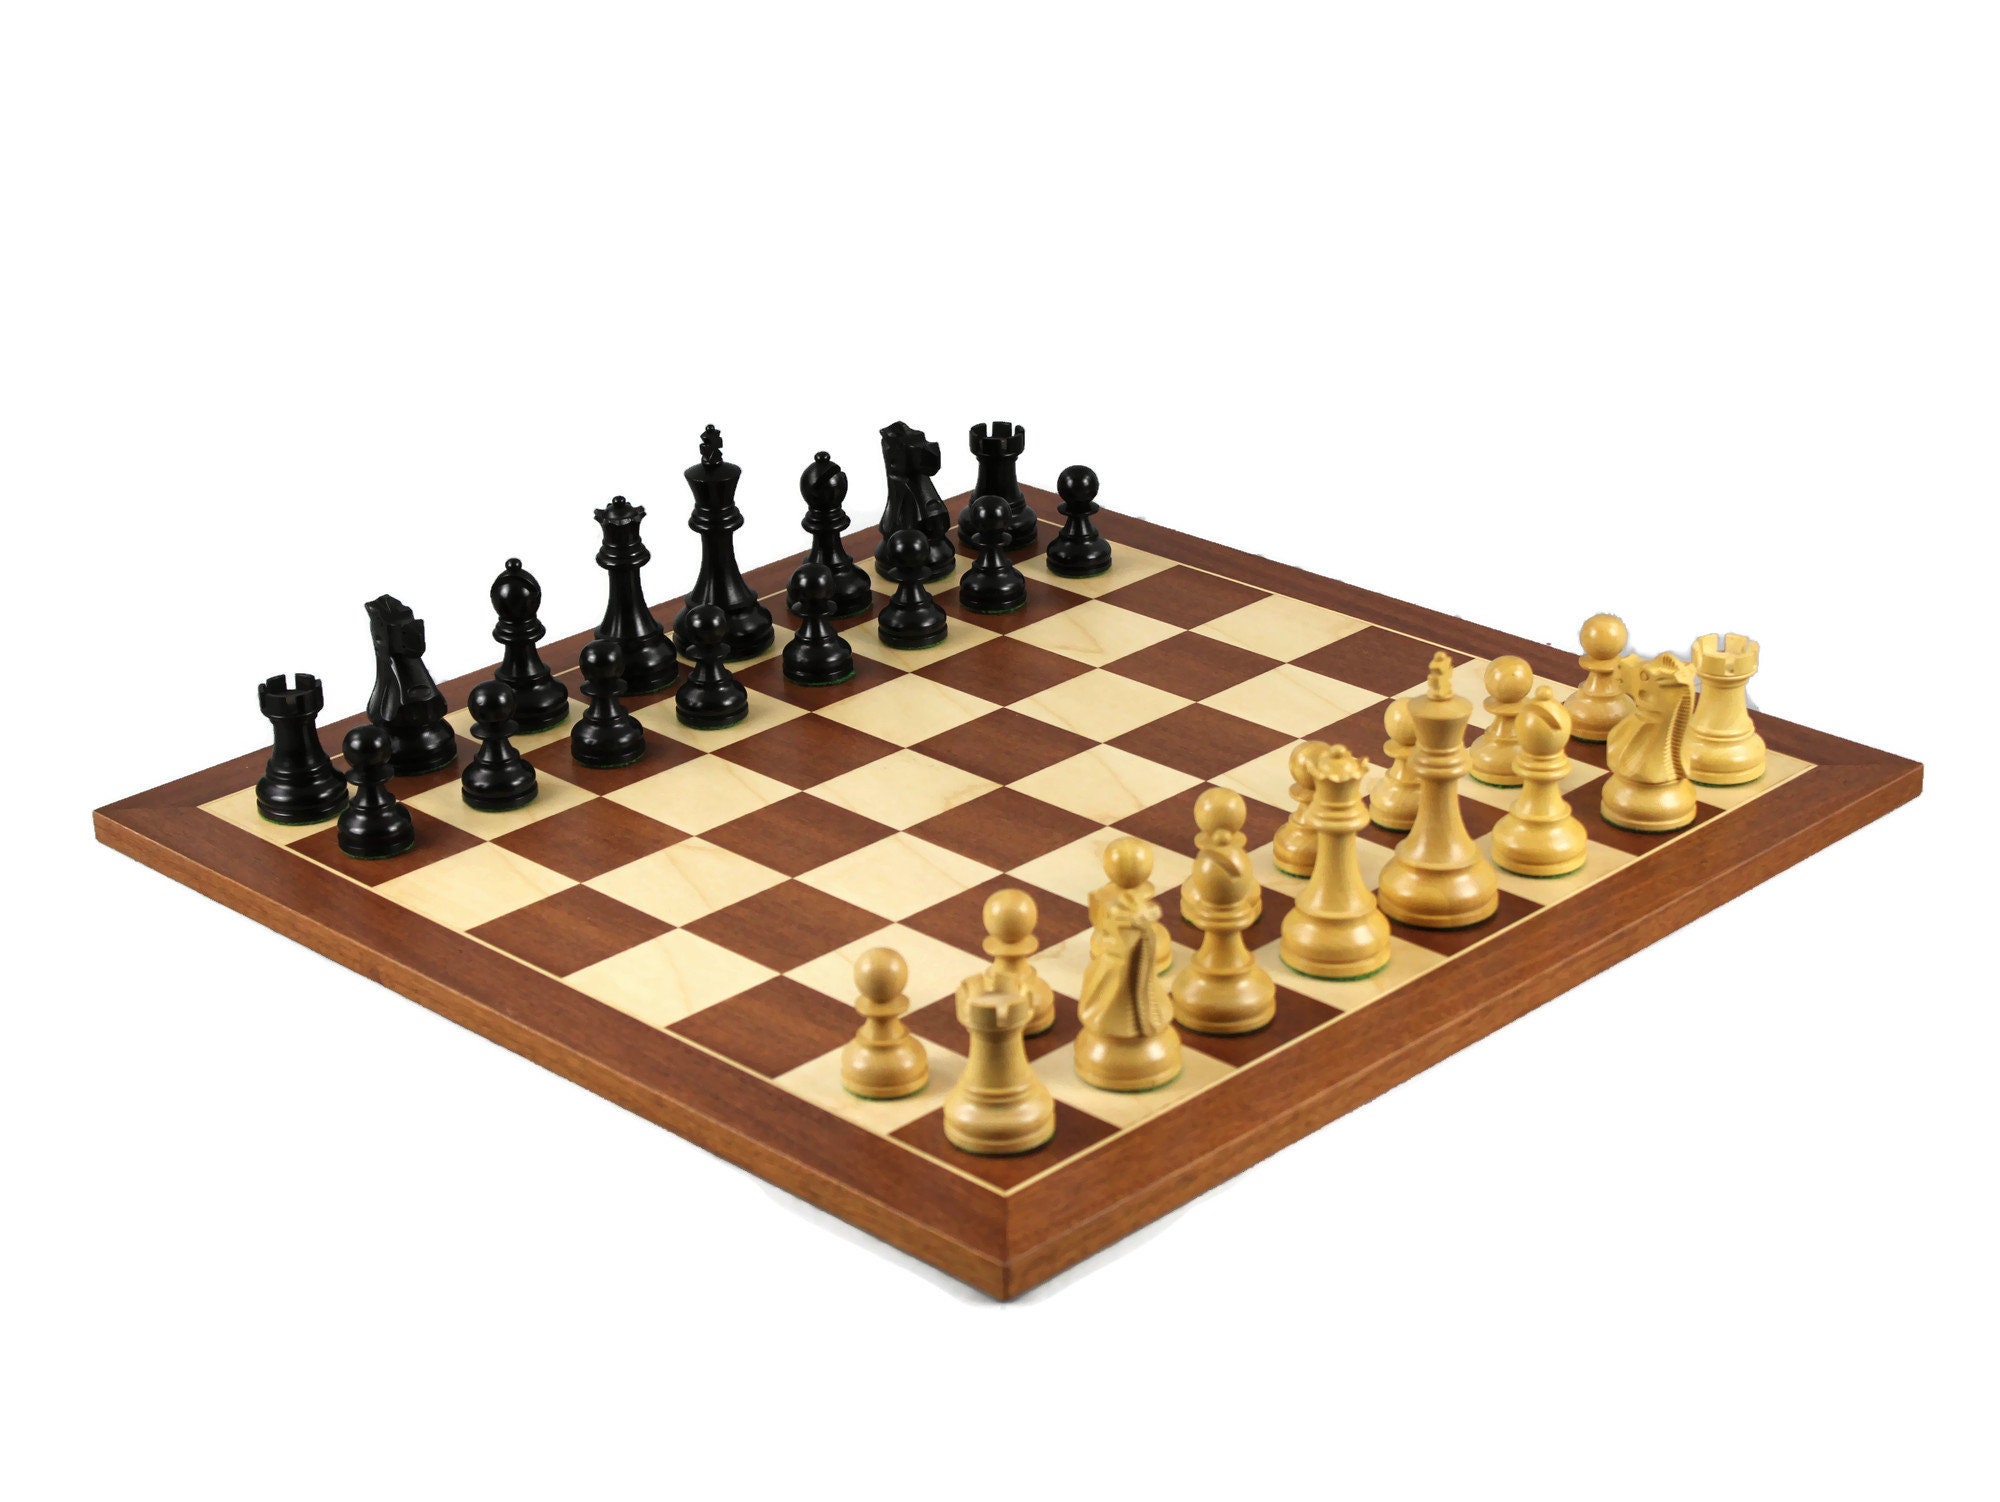 21.6” Mahogany wooden chess board with coordinates